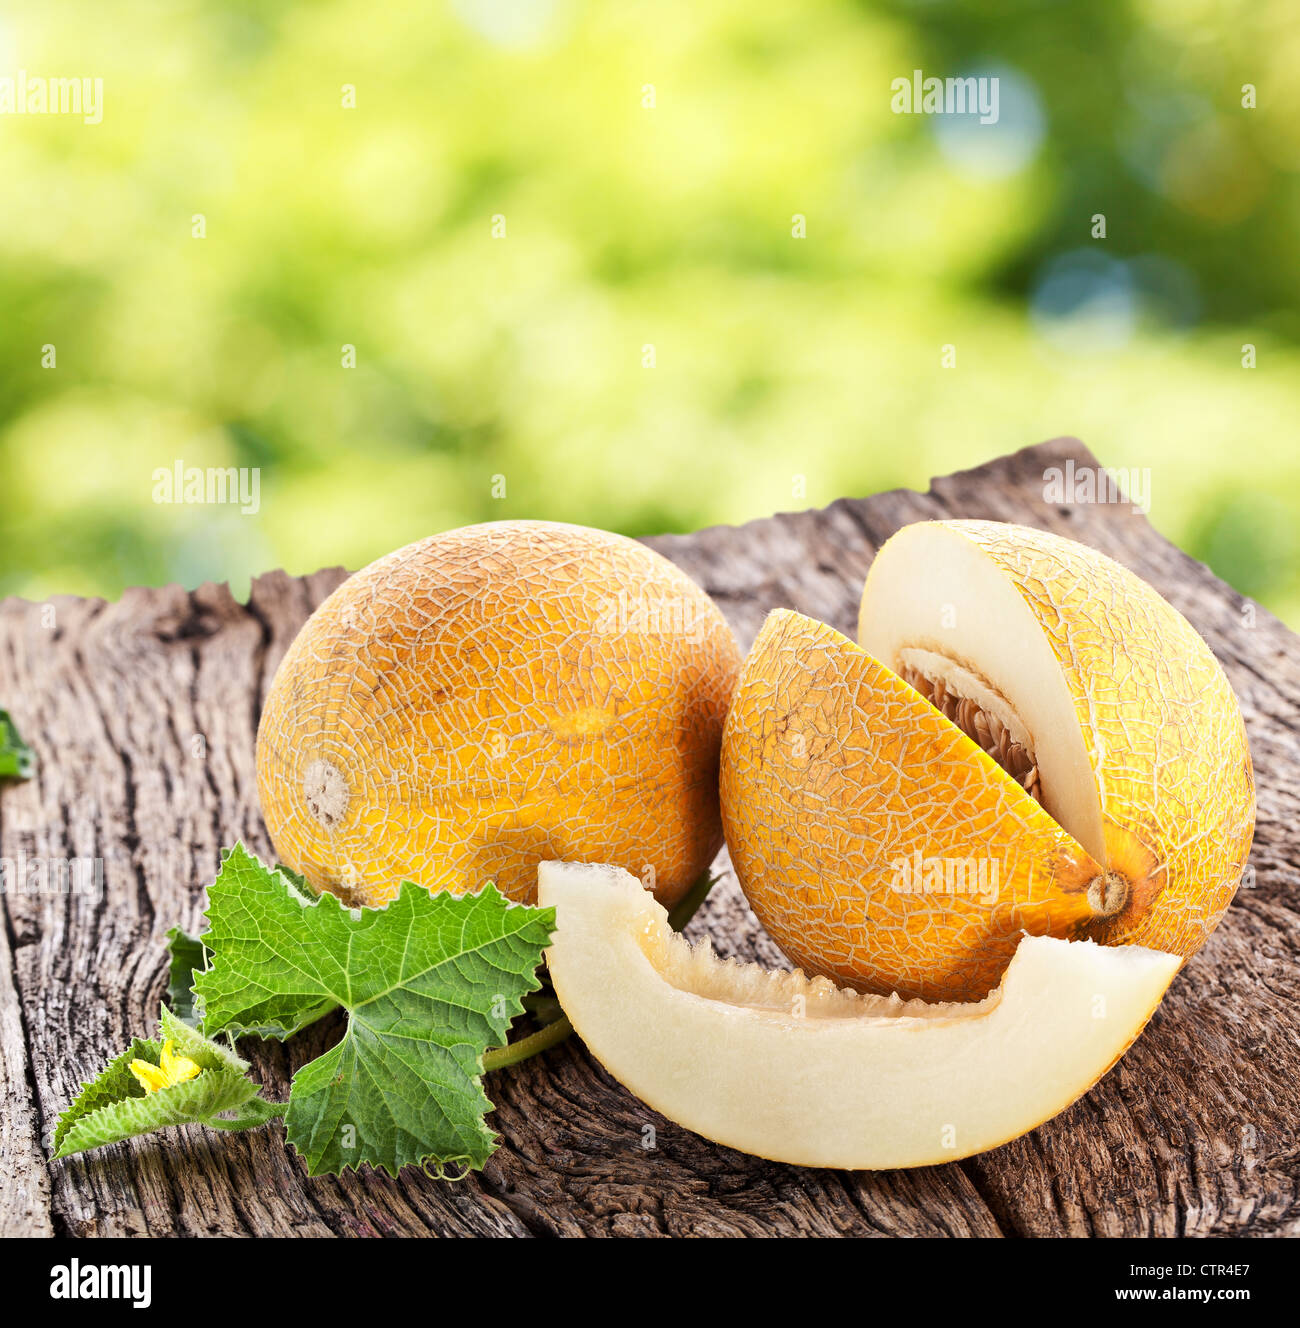 Melon with slices and leaves on a old wooden table. Stock Photo